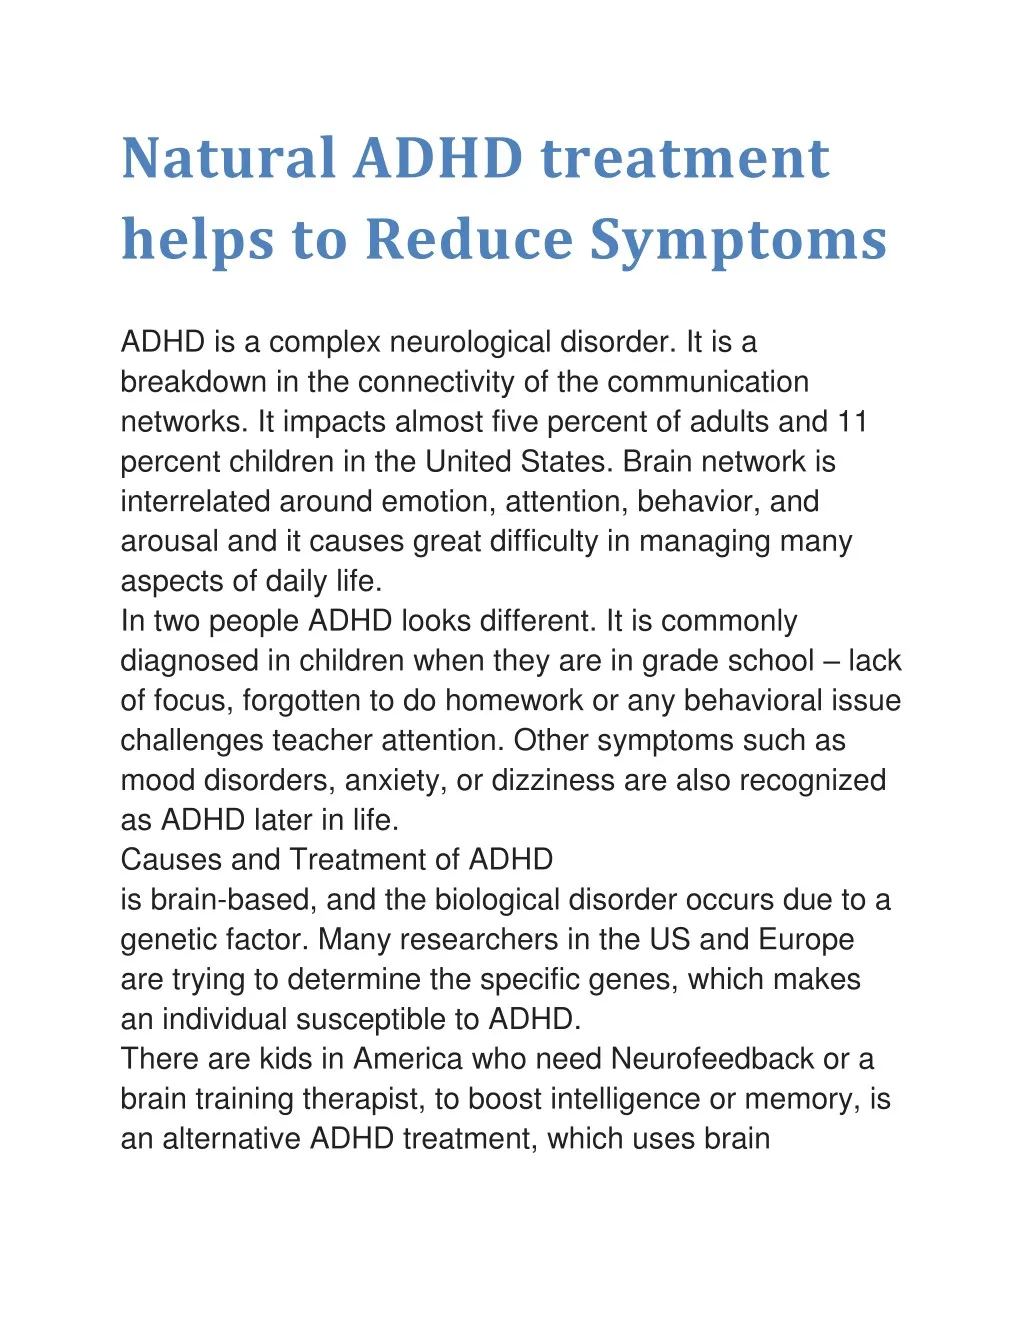 natural adhd treatment helps to reduce symptoms